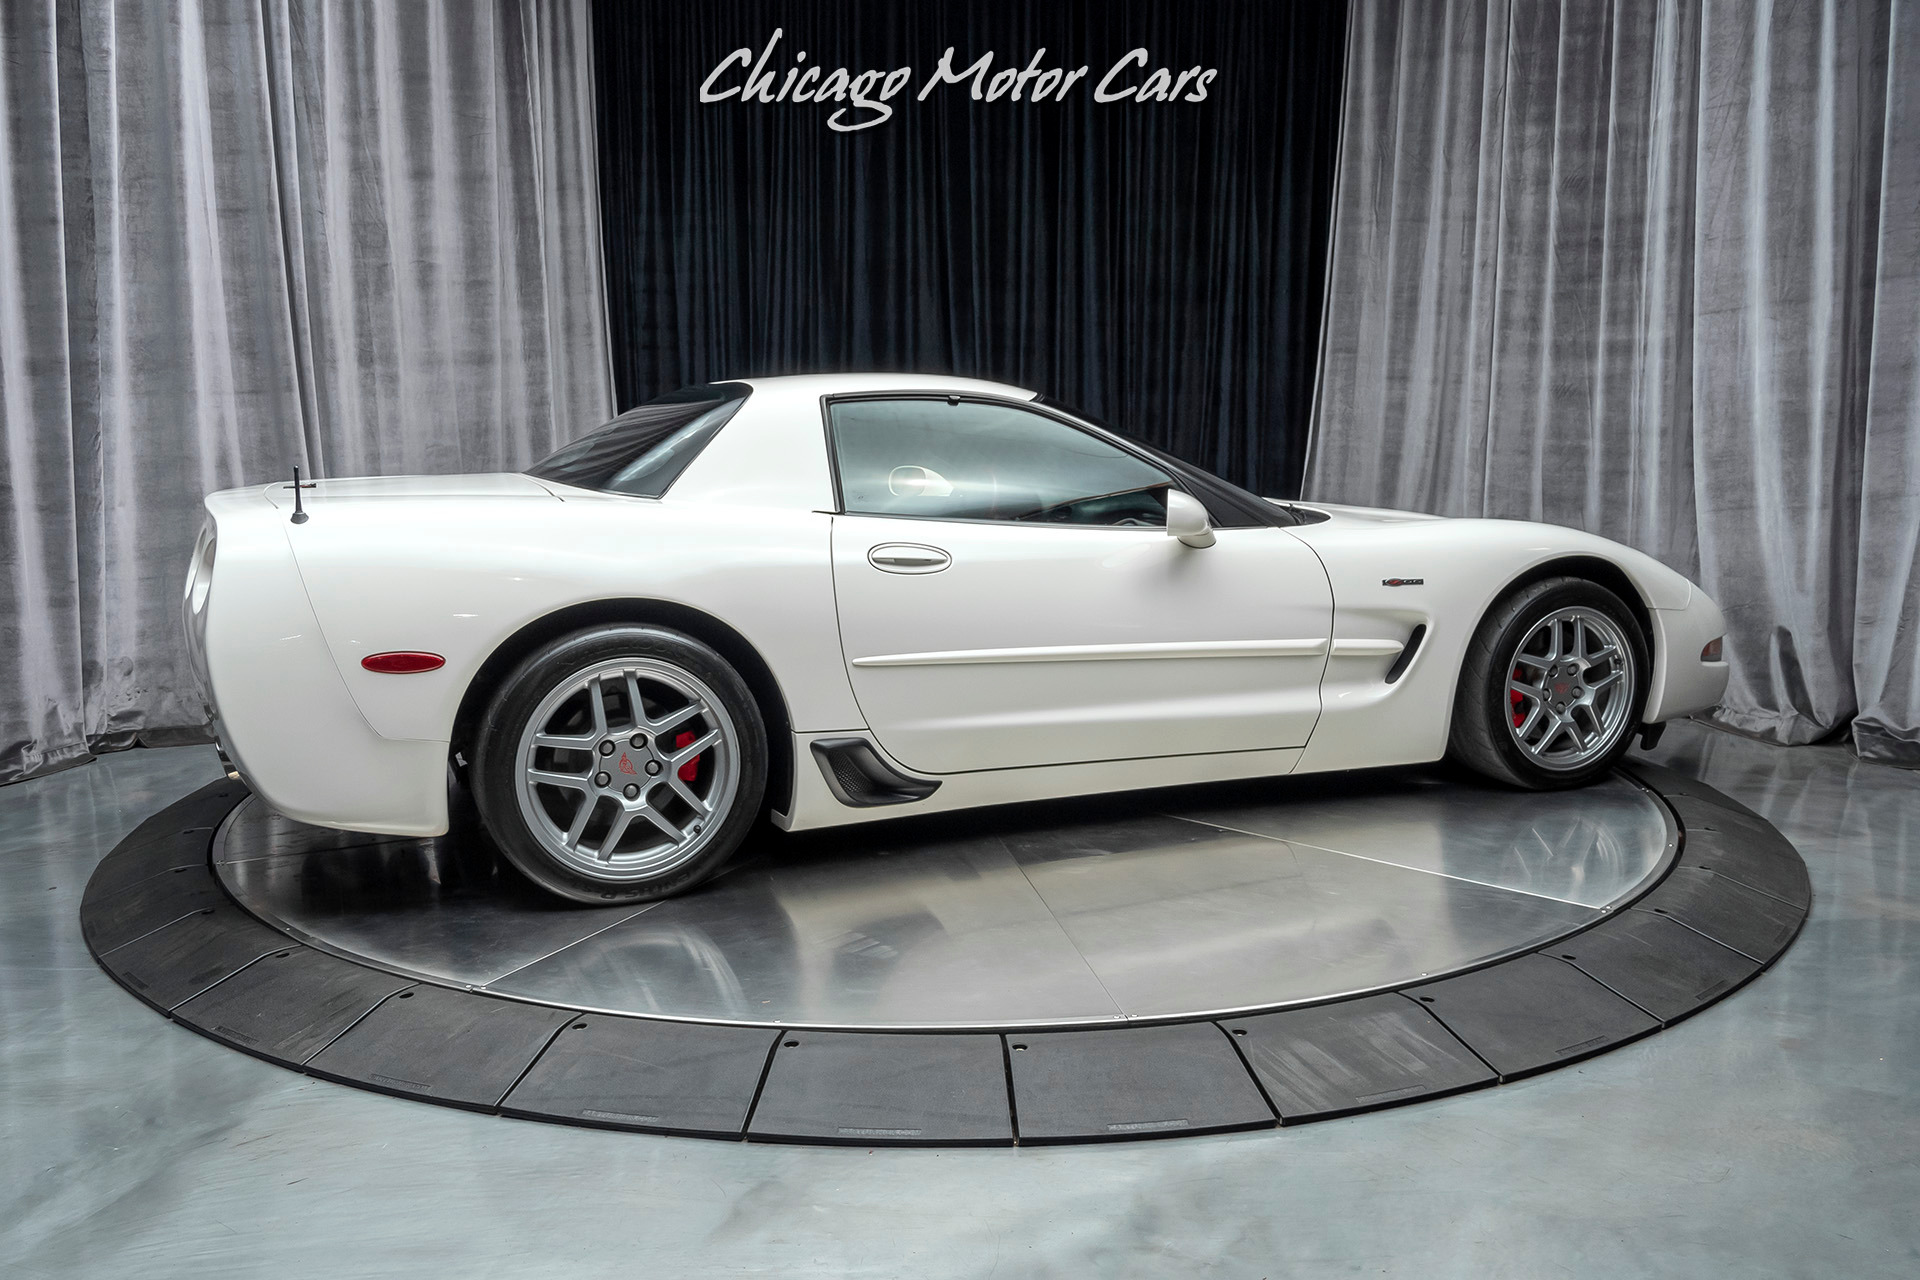 Used-2001-Chevrolet-Corvette-Z06-RARE-SPEEDWAY-WHITE-1-OF-137-COLLECTOR-QUALITY